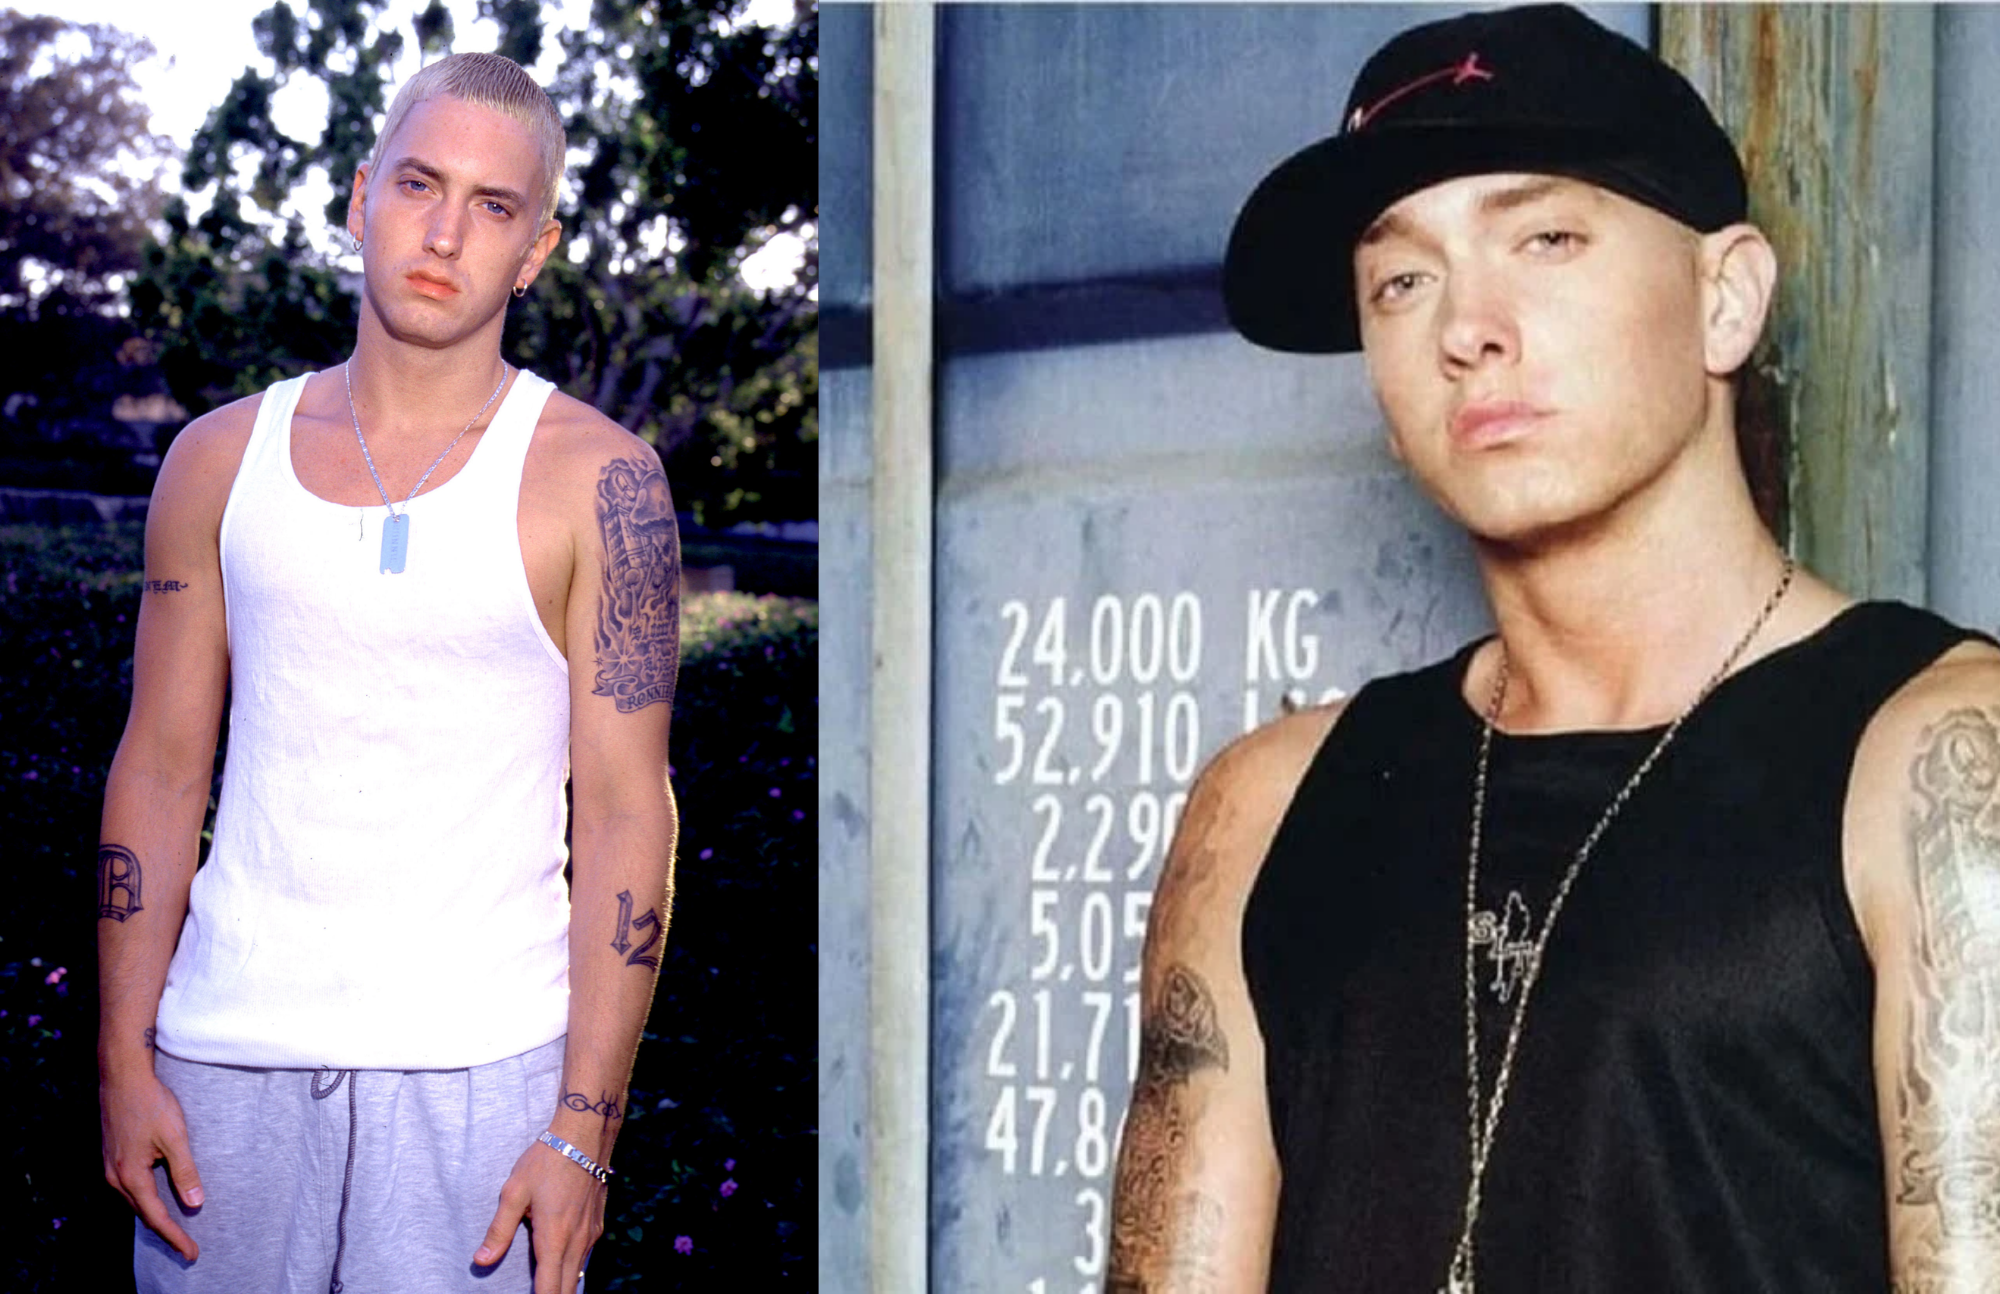 On the left, a younger Eminem is wearing a white sleeveless shirt. On the right, he is wearing a black one